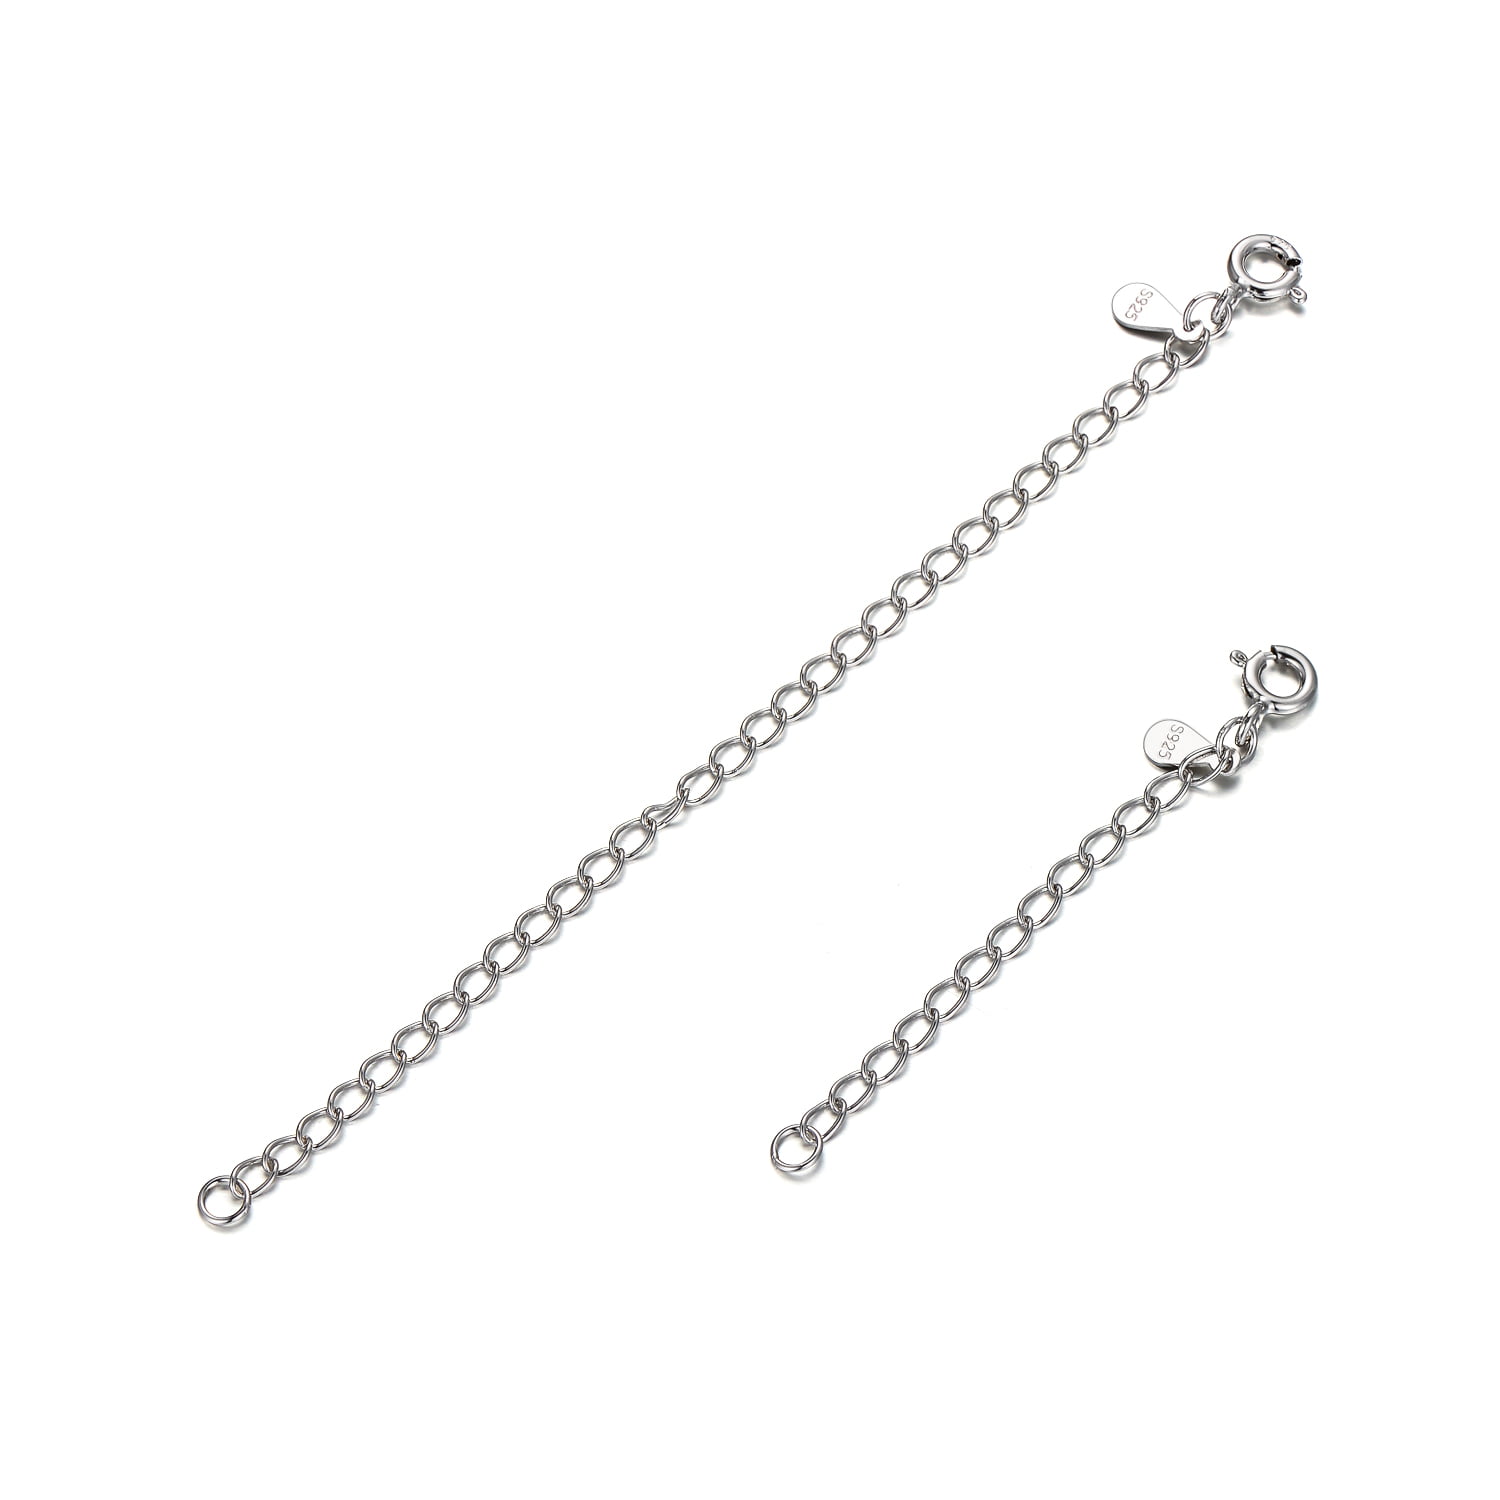 chain extender necklace extension silver extension beads gold extension bracelet extension clip ons anklet extension Extension chain